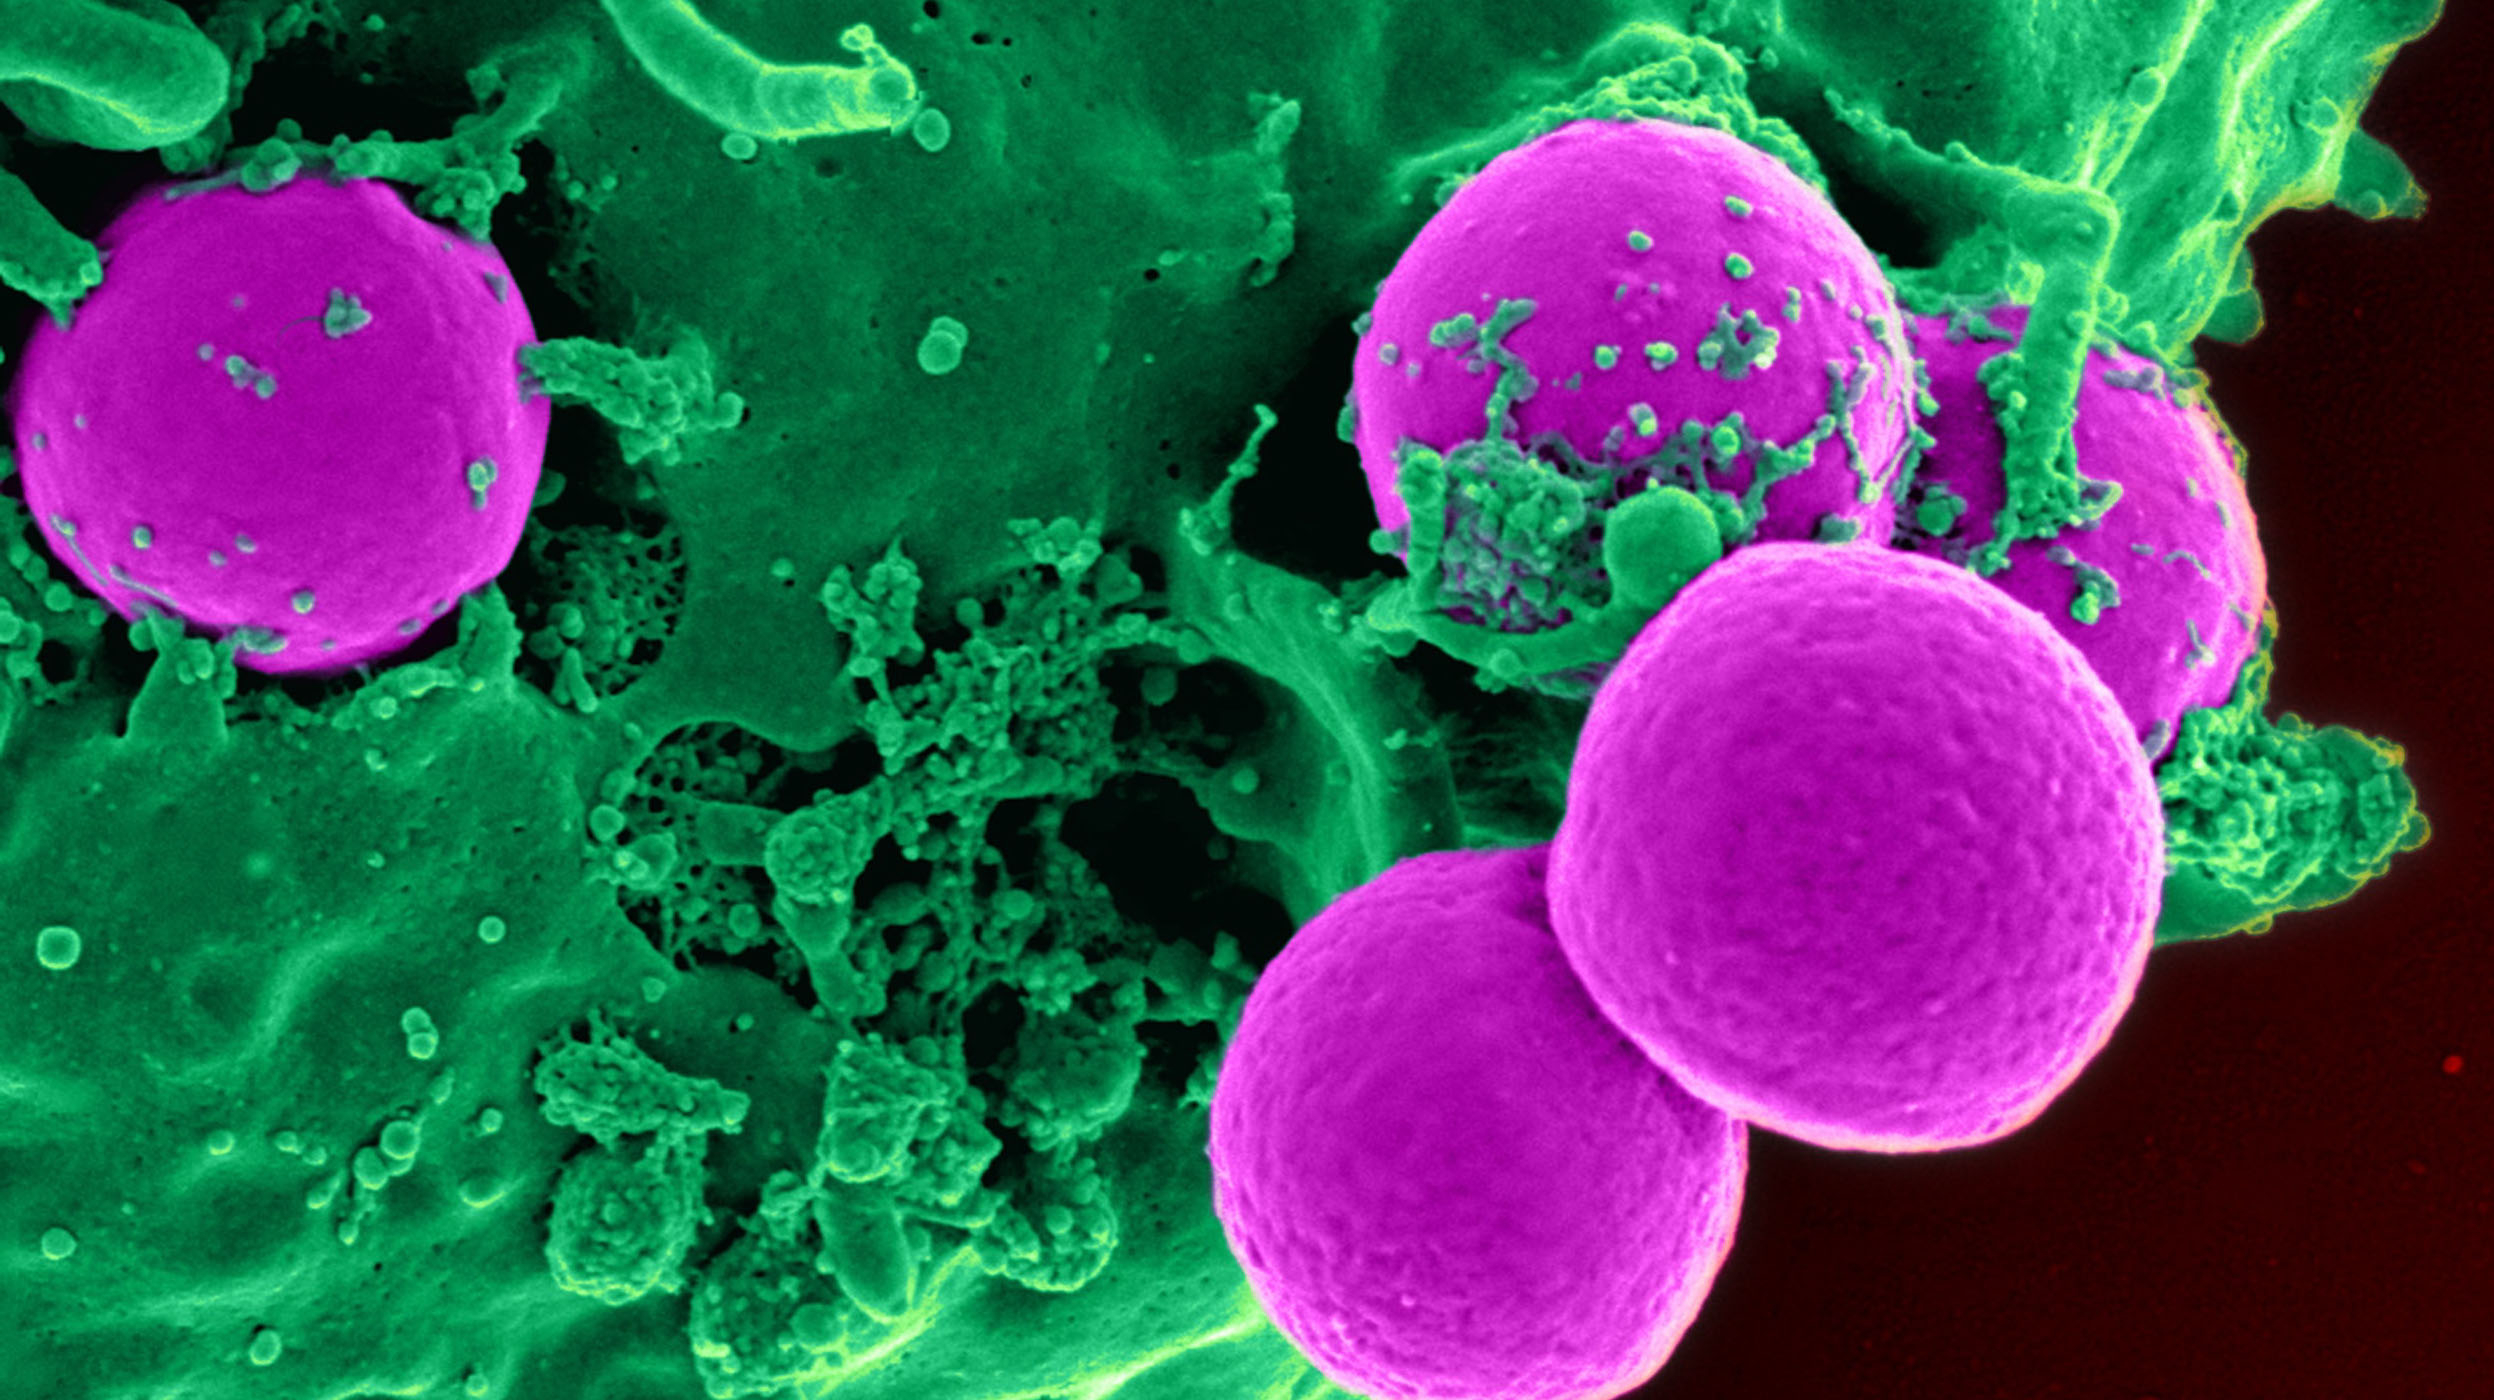 image of purple and green bacteria